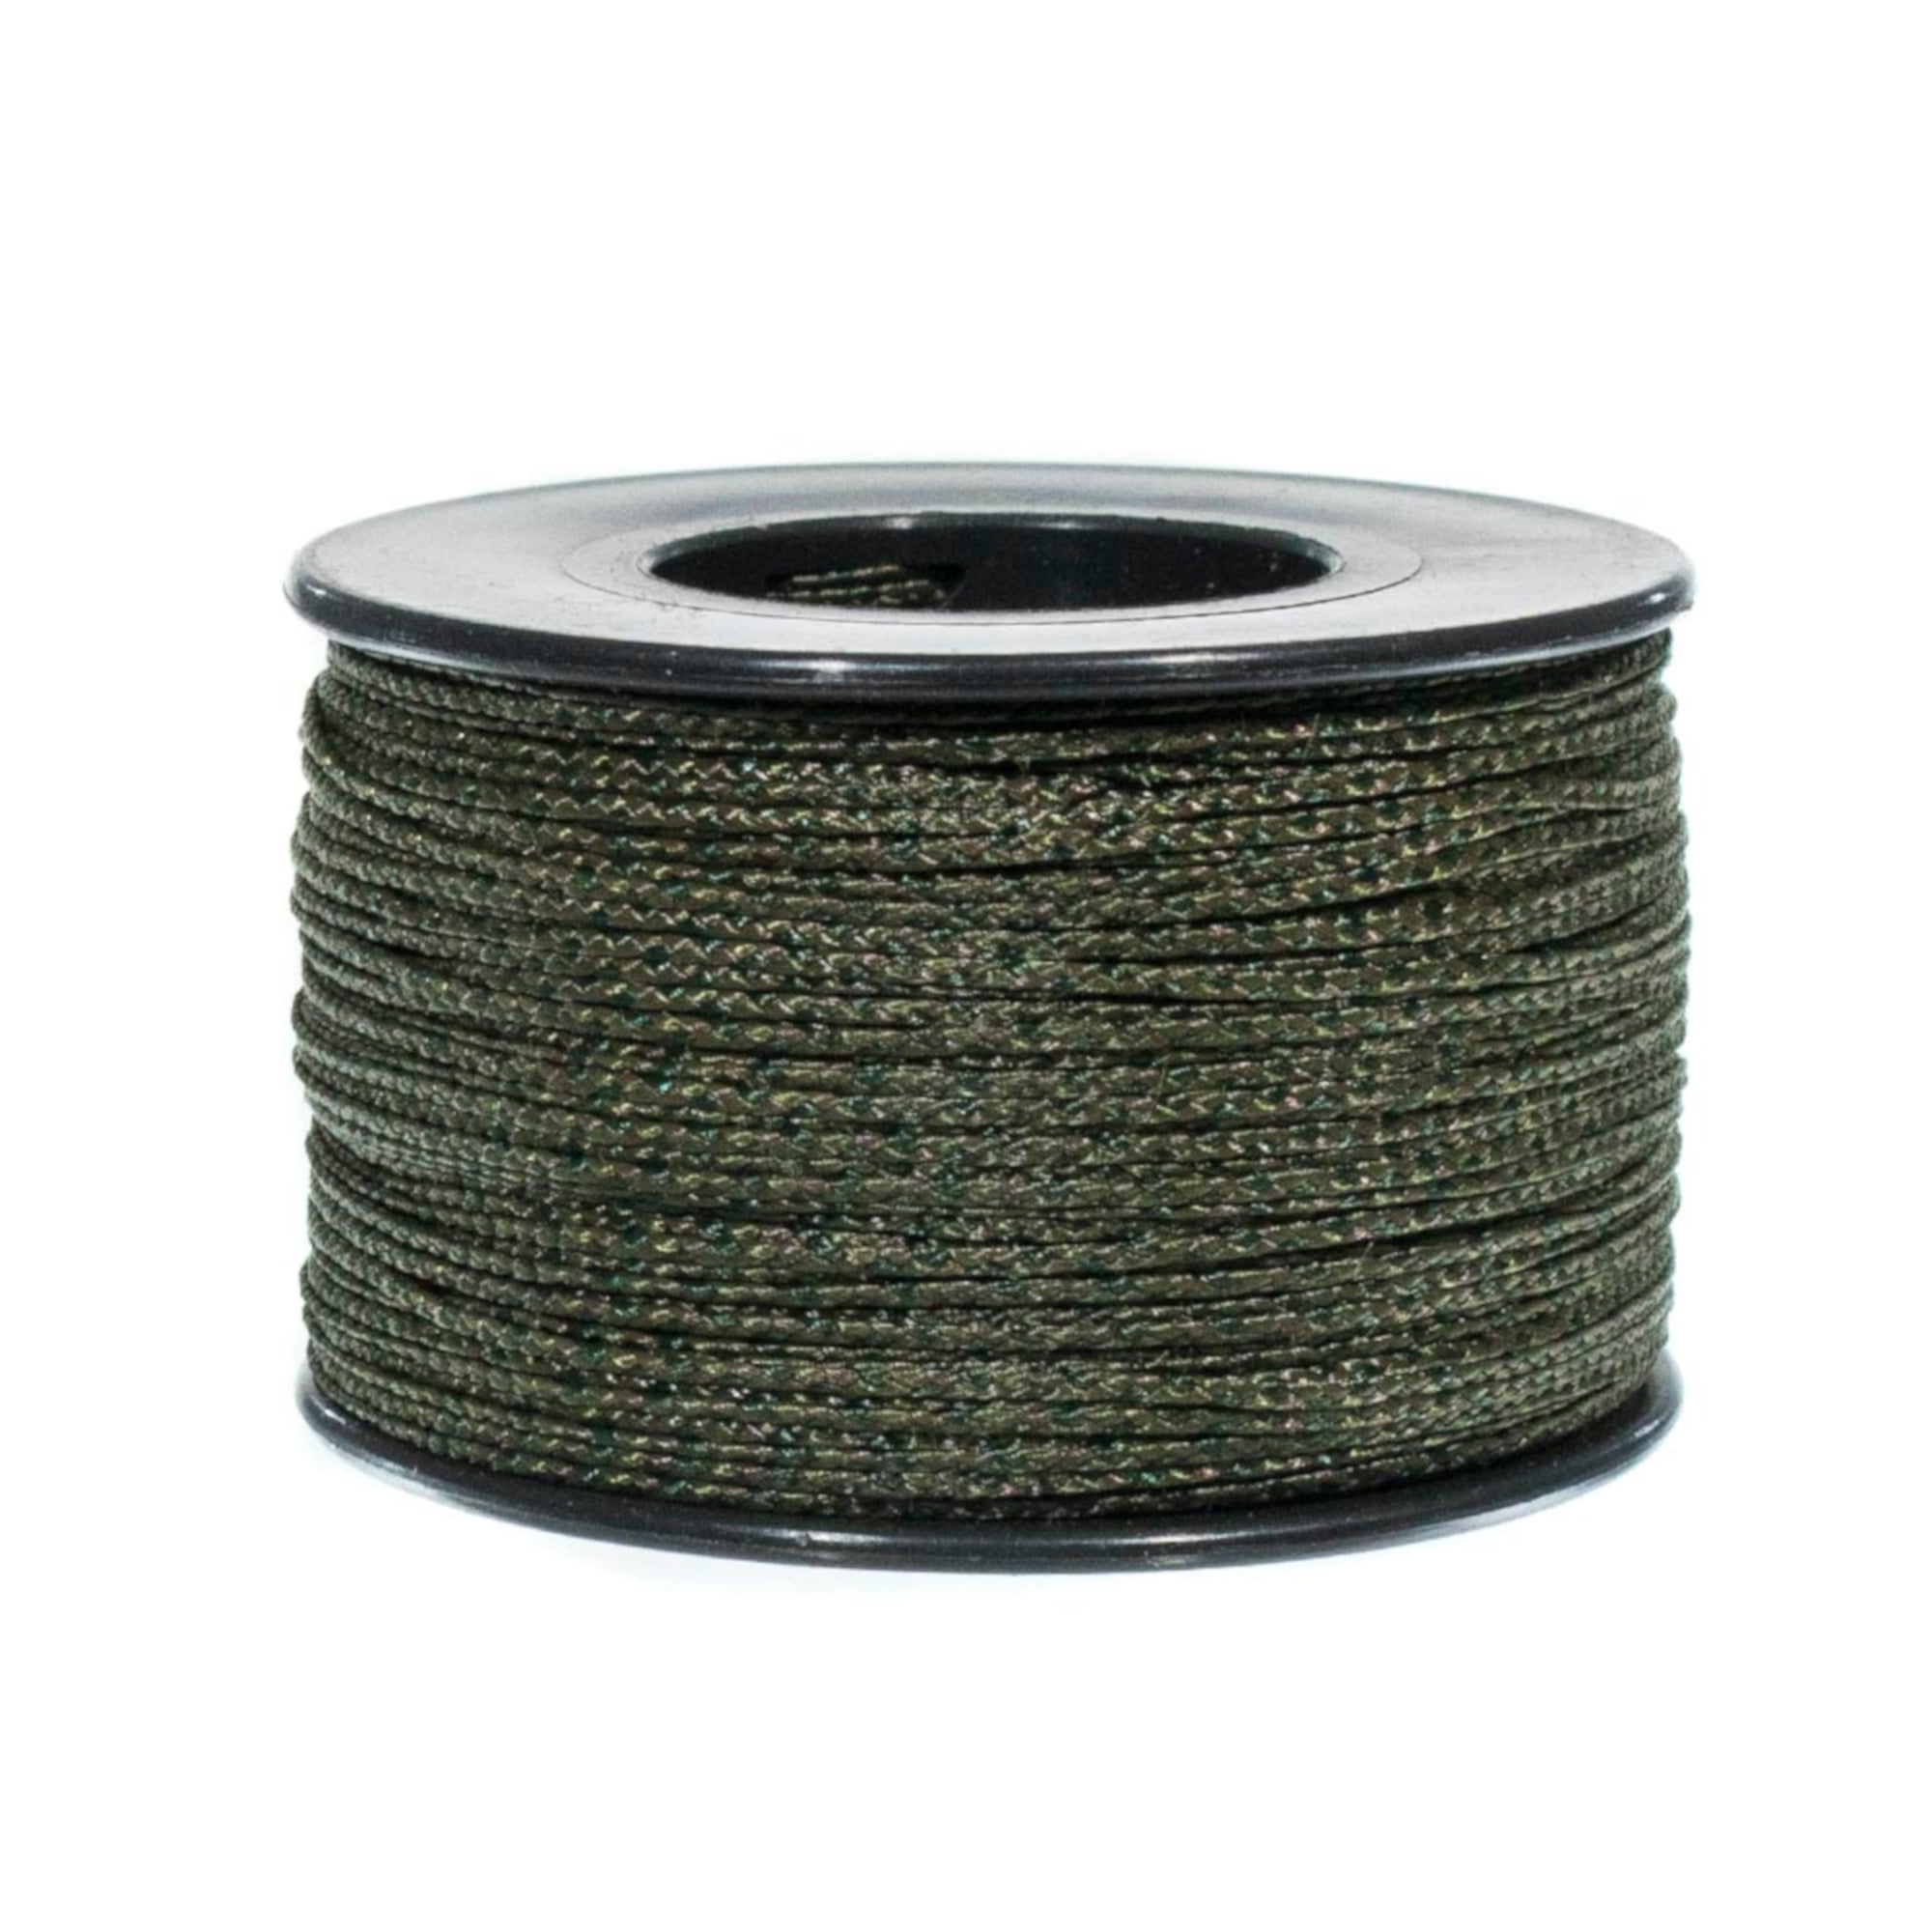 300 and 125 Feet Spool of Braided Cord Available in a Variety of Colors West Coast Paracord Nano and Micro Cord